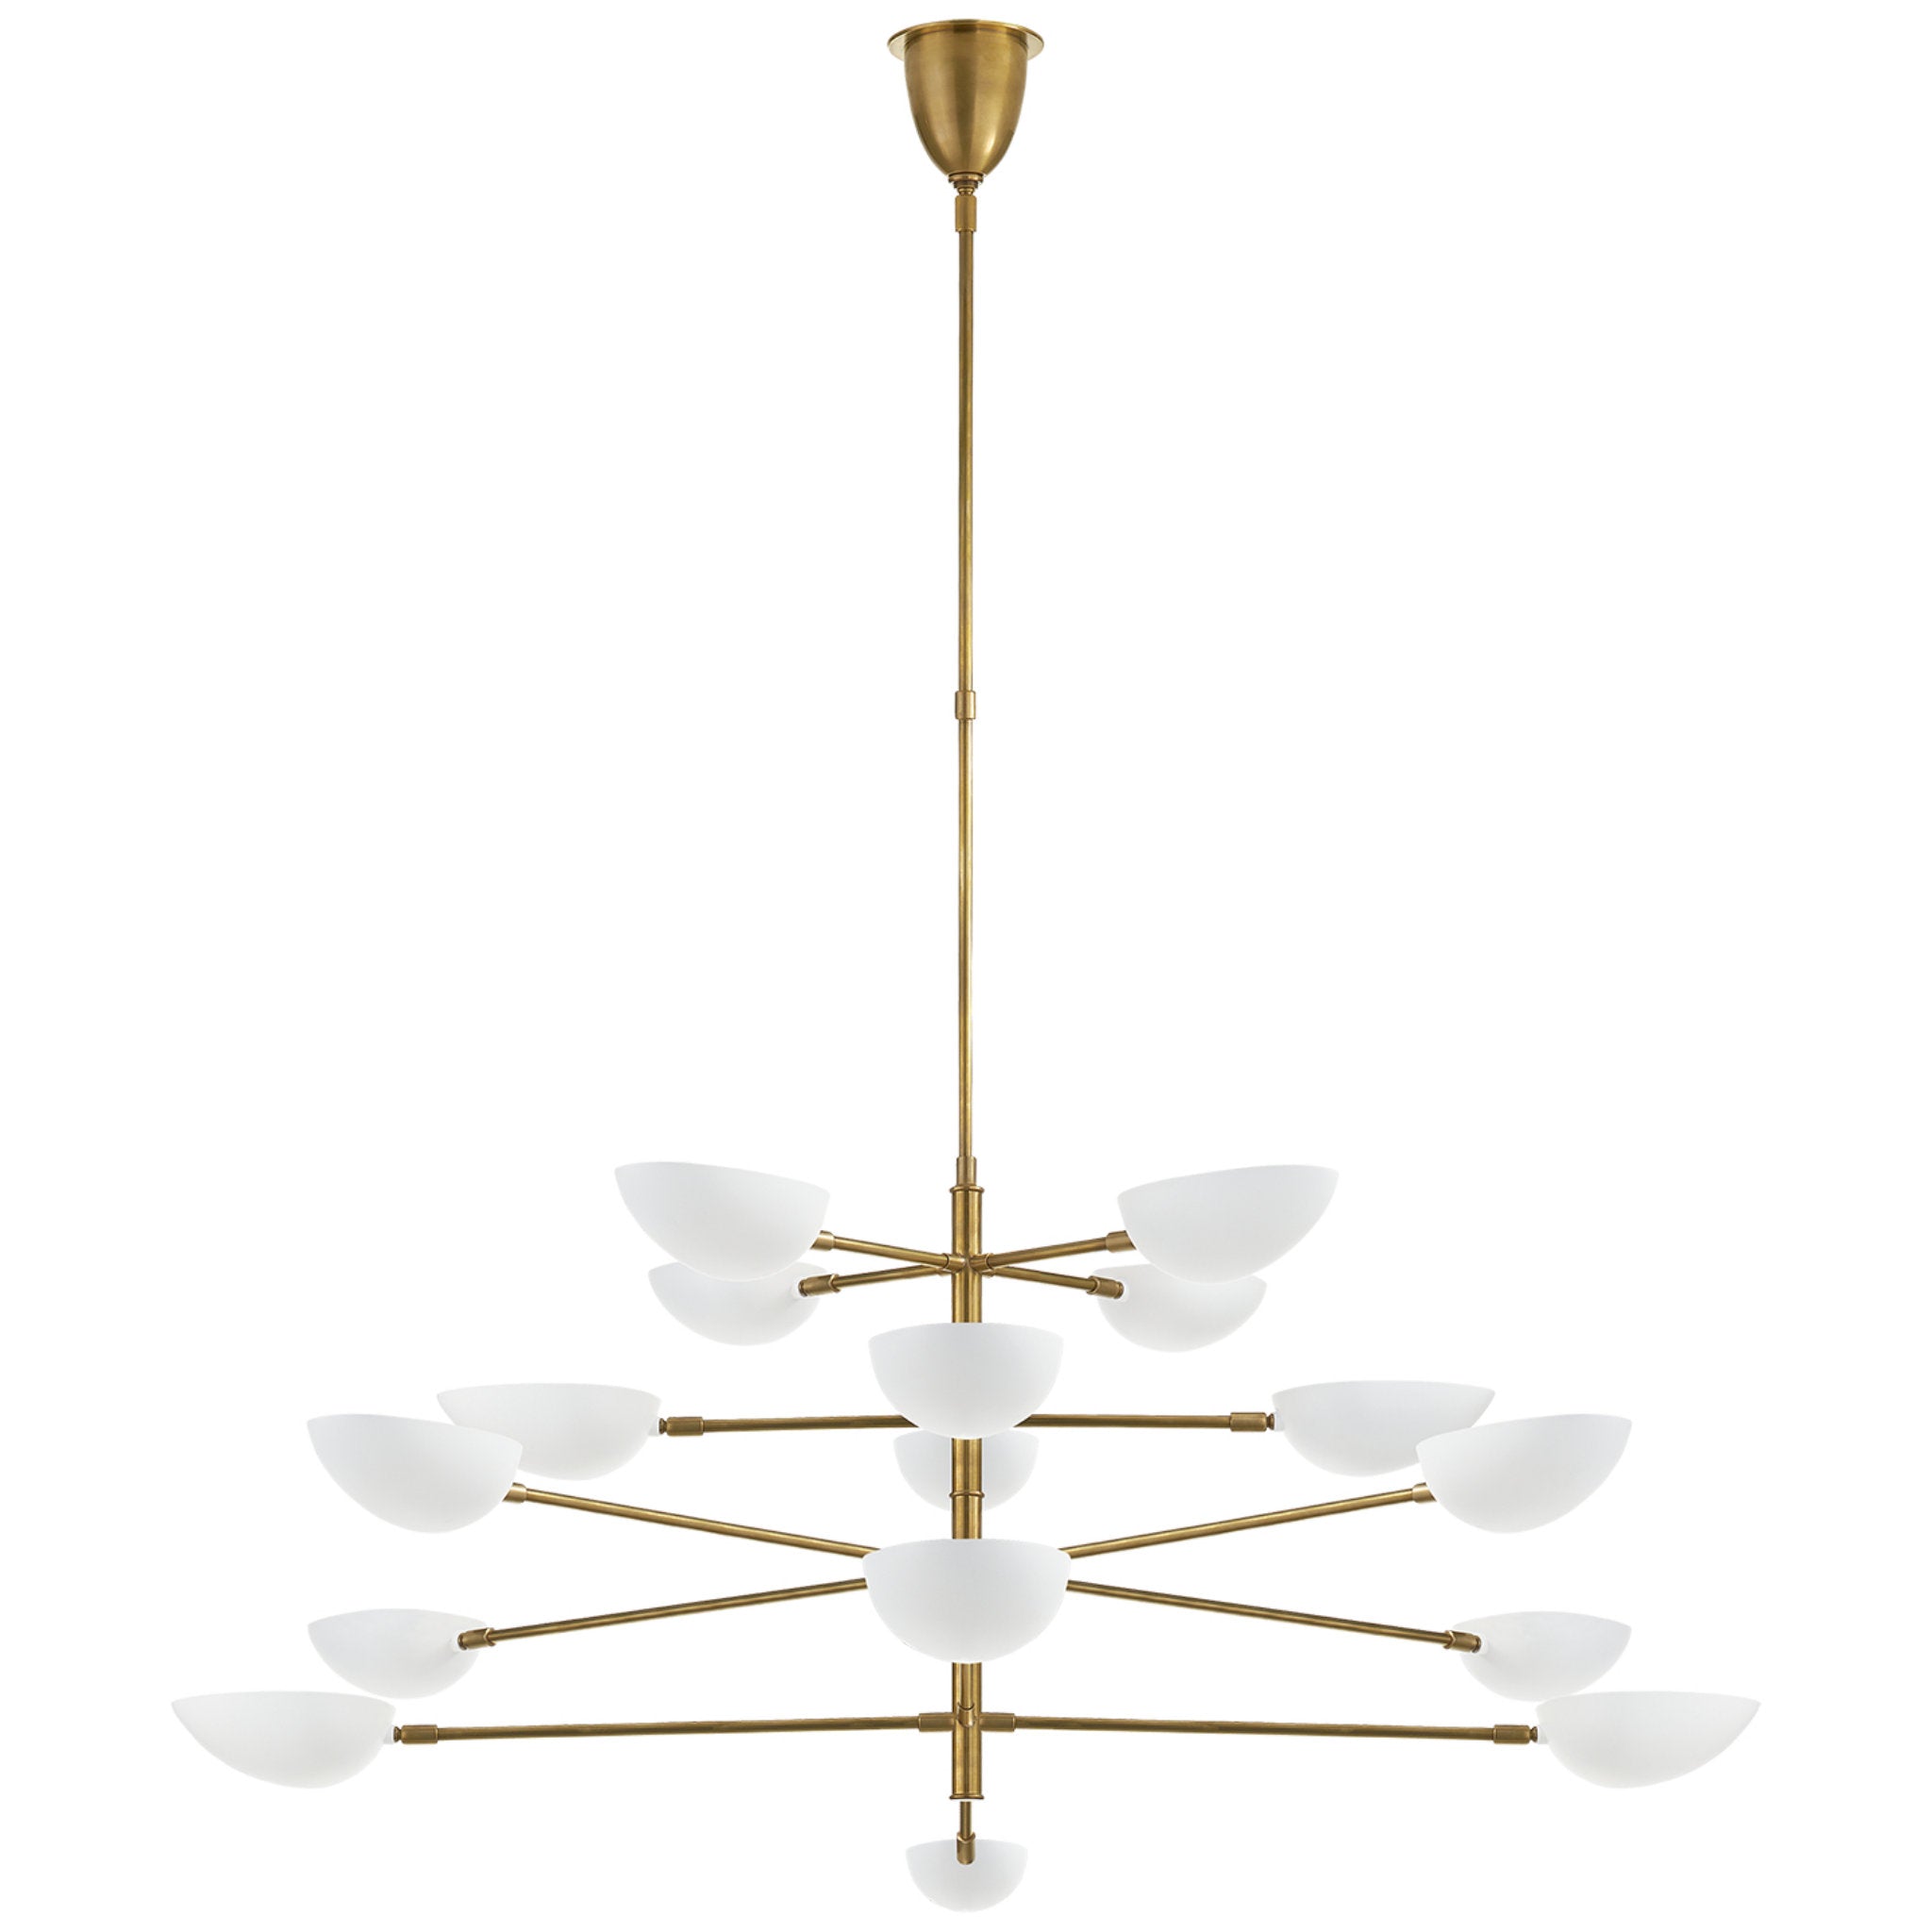 AERIN Graphic Grande Four-Tier Chandelier in Hand-Rubbed Antique Brass with White Shades